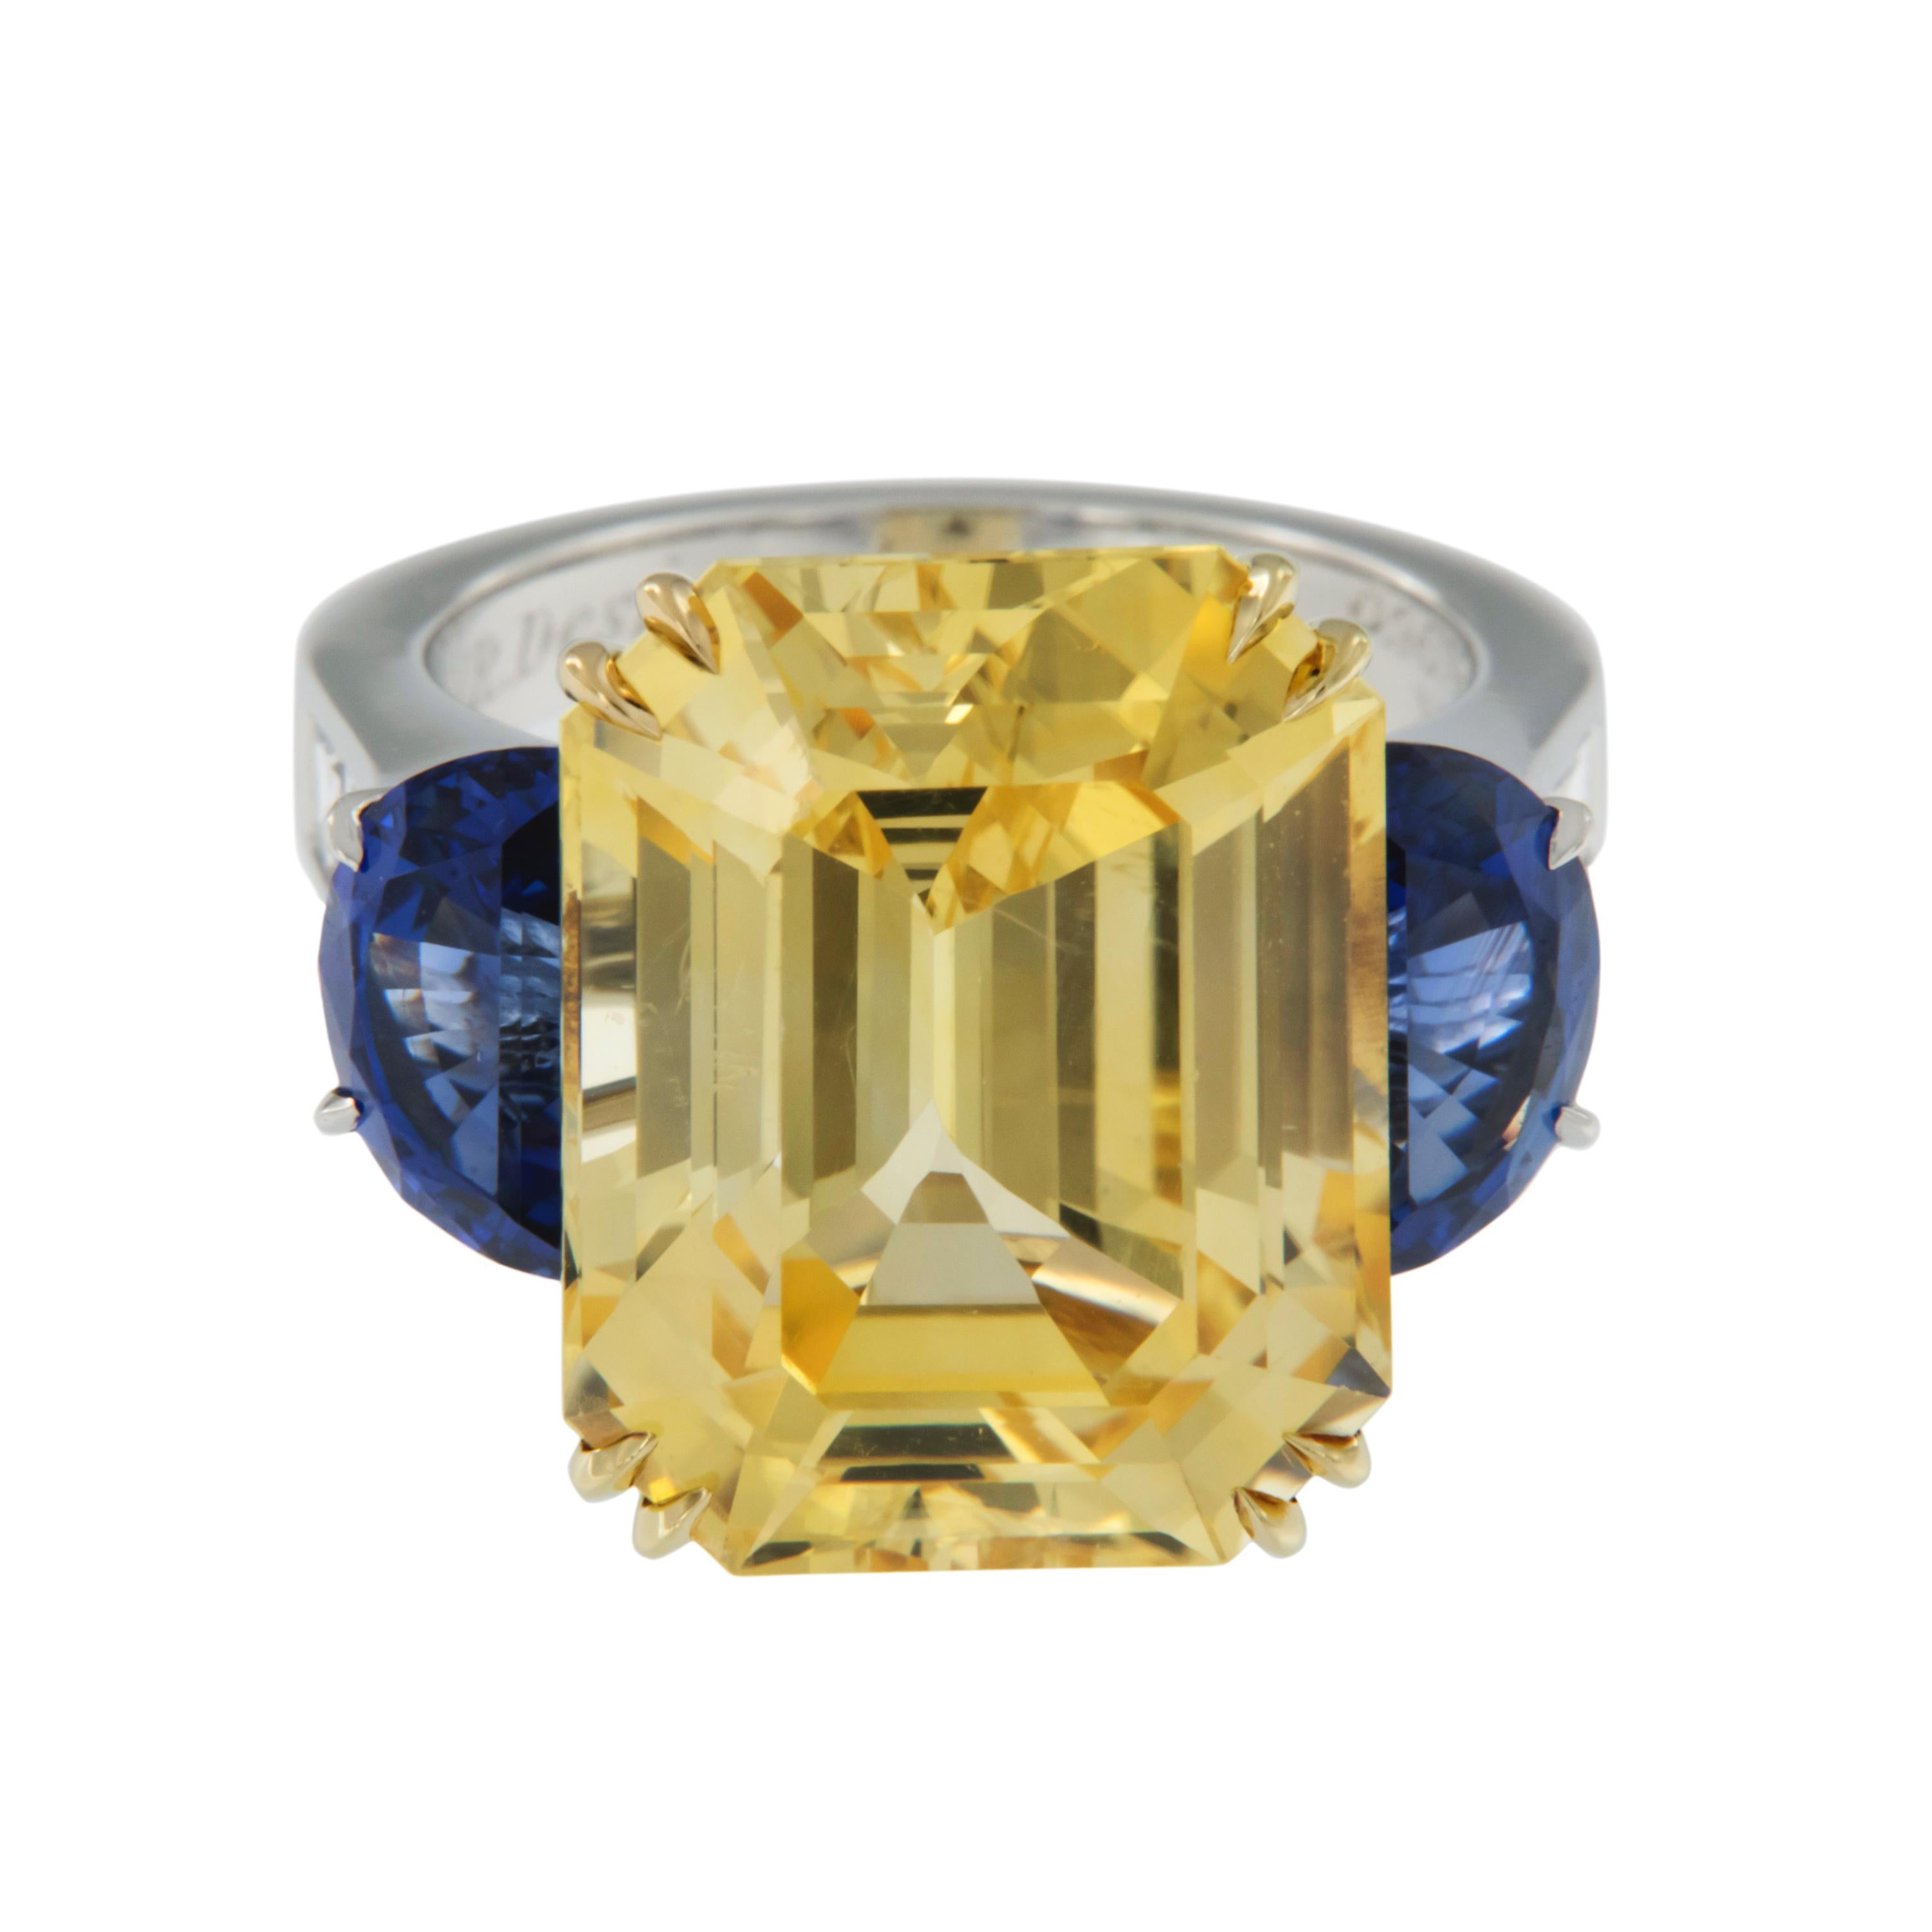 Hail to the Victor Valiant - or Hail to this One of a Kind Impressive ring! Handmade in New York, this spectacular ring houses a massive 22.37 carat yellow sapphire, perfectly flanked by moon cut rich blue sapphires (4.21 Cttw) and topped off with